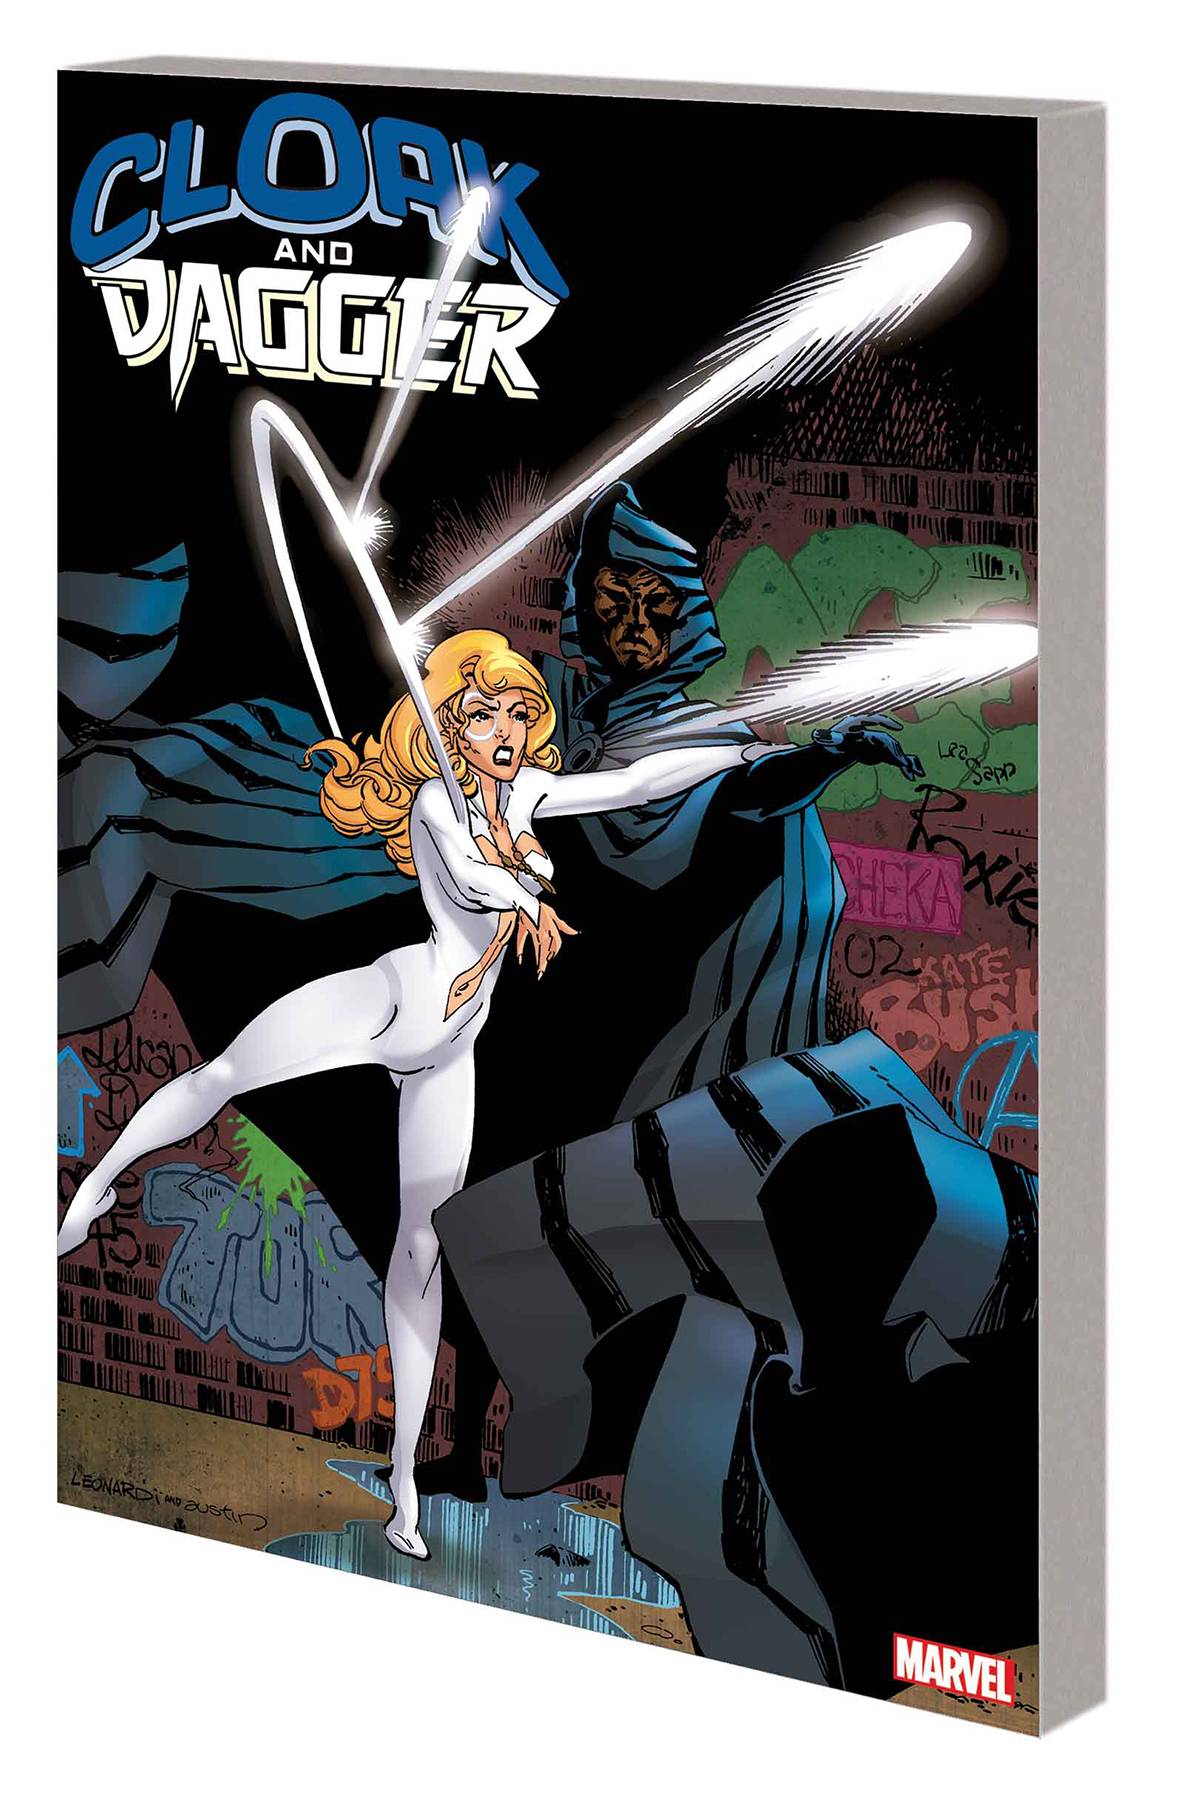 NOV160981 - CLOAK AND DAGGER TP SHADOWS AND LIGHT - Free Comic Book Day